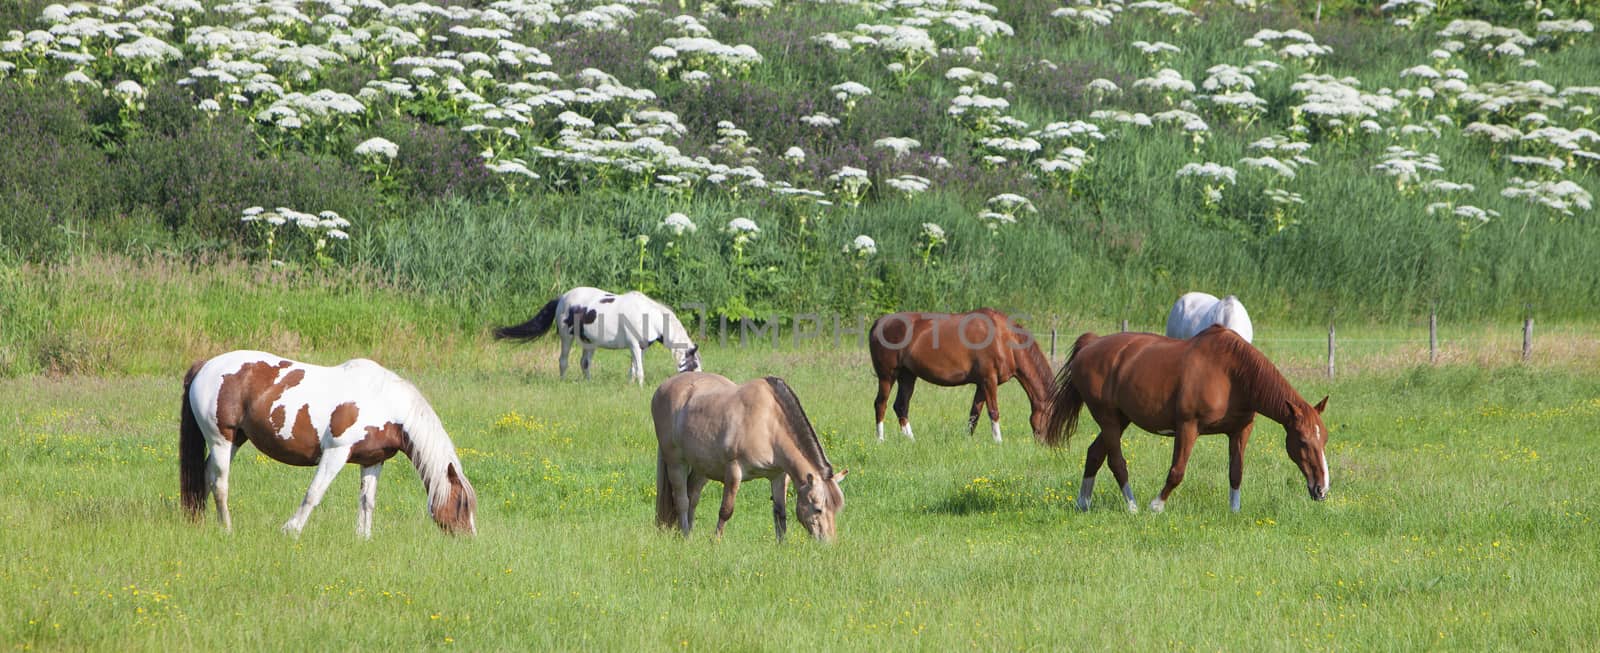 brown and white horses graze in grassy summer meadow in the netherlands